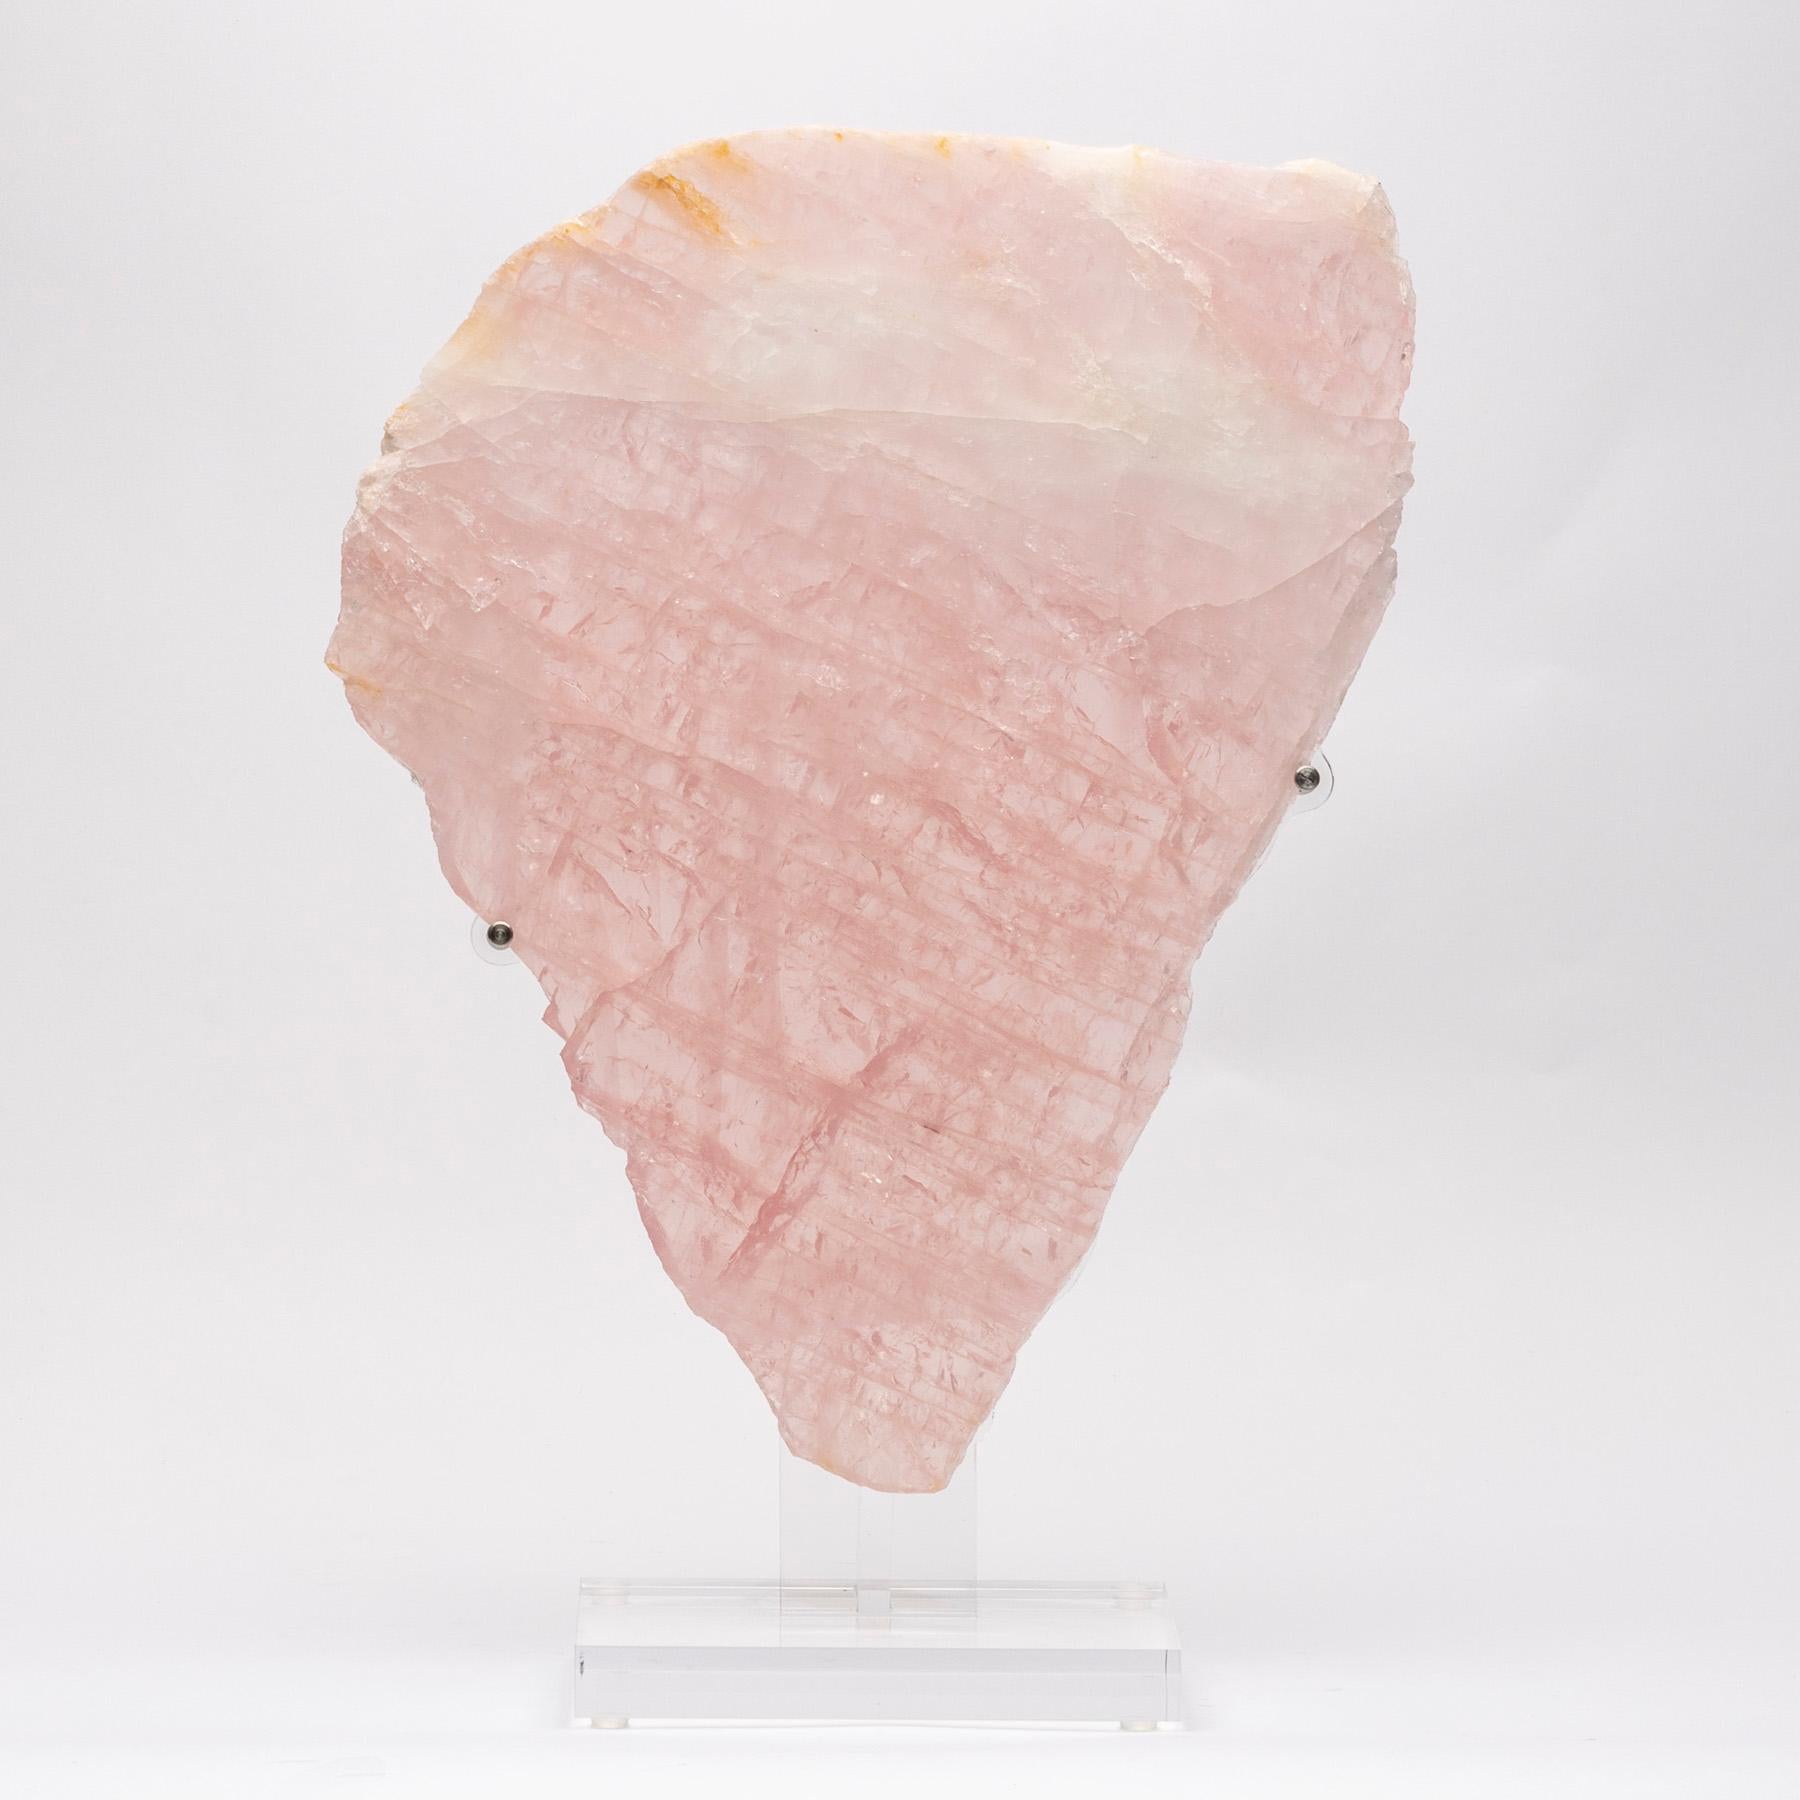 Beautiful natural shape Brazilian rose quartz 
The base is original and organic designed to fit and enhance the slab perfectly.